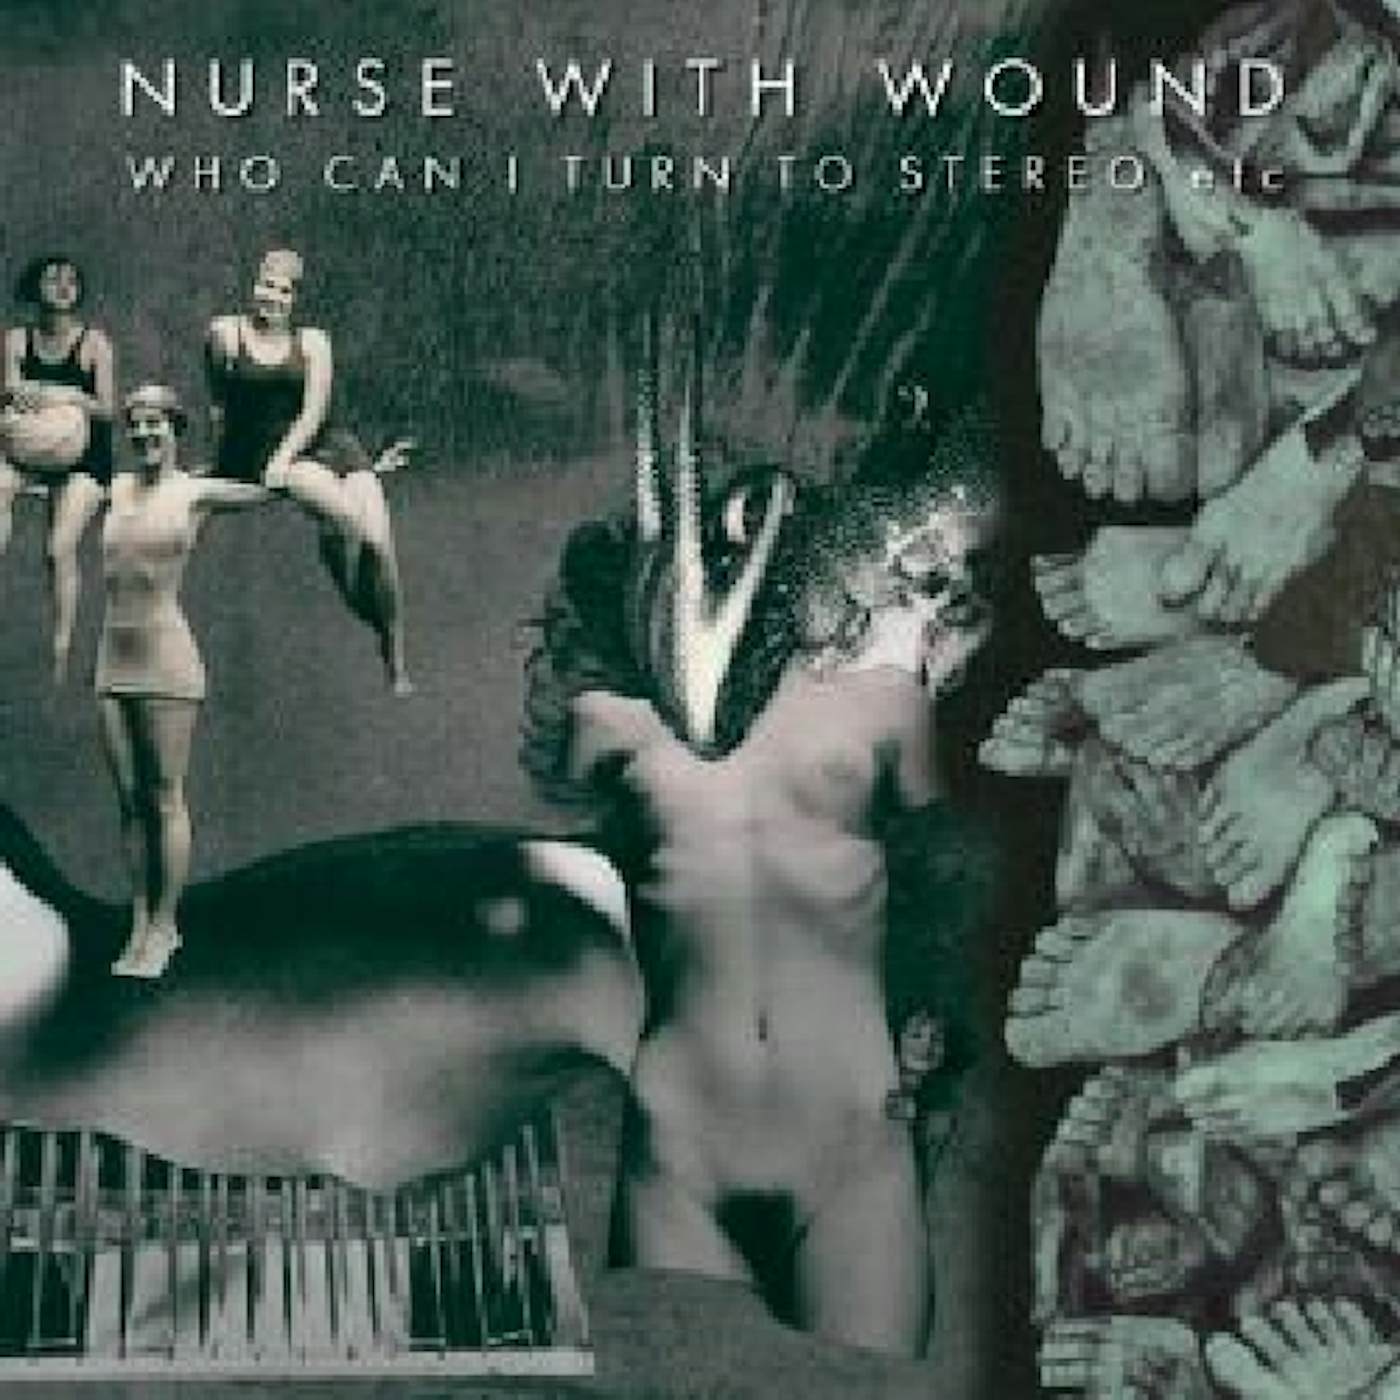 Nurse With Wound WHO CAN I TURN TO STEREO CD